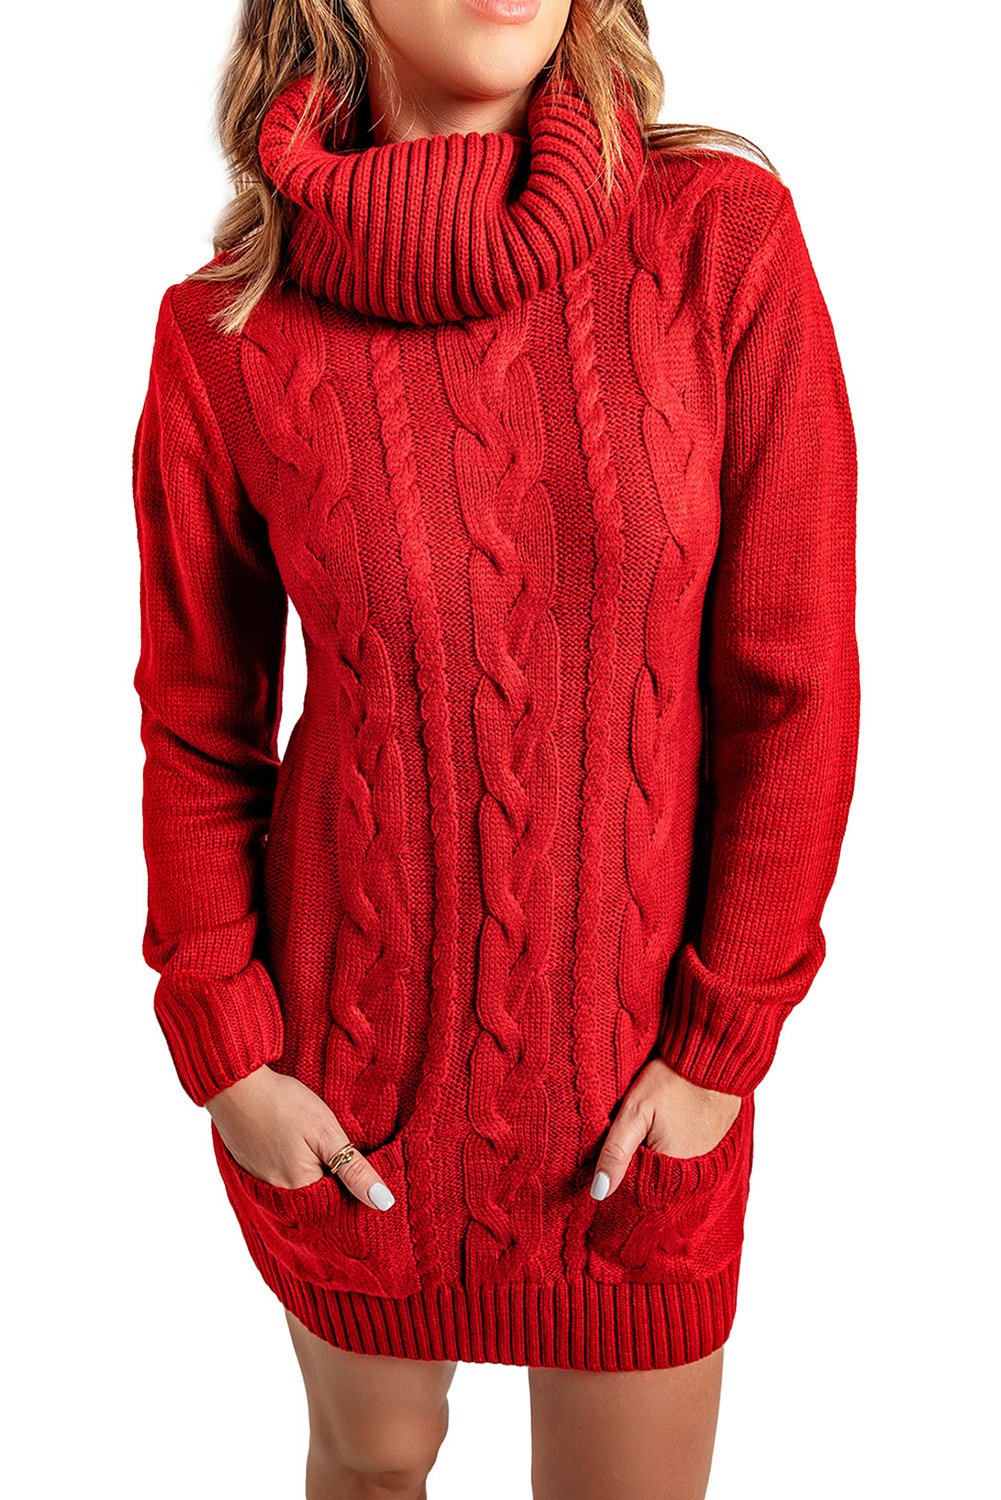 Red Cowl Neck Sweater Dress